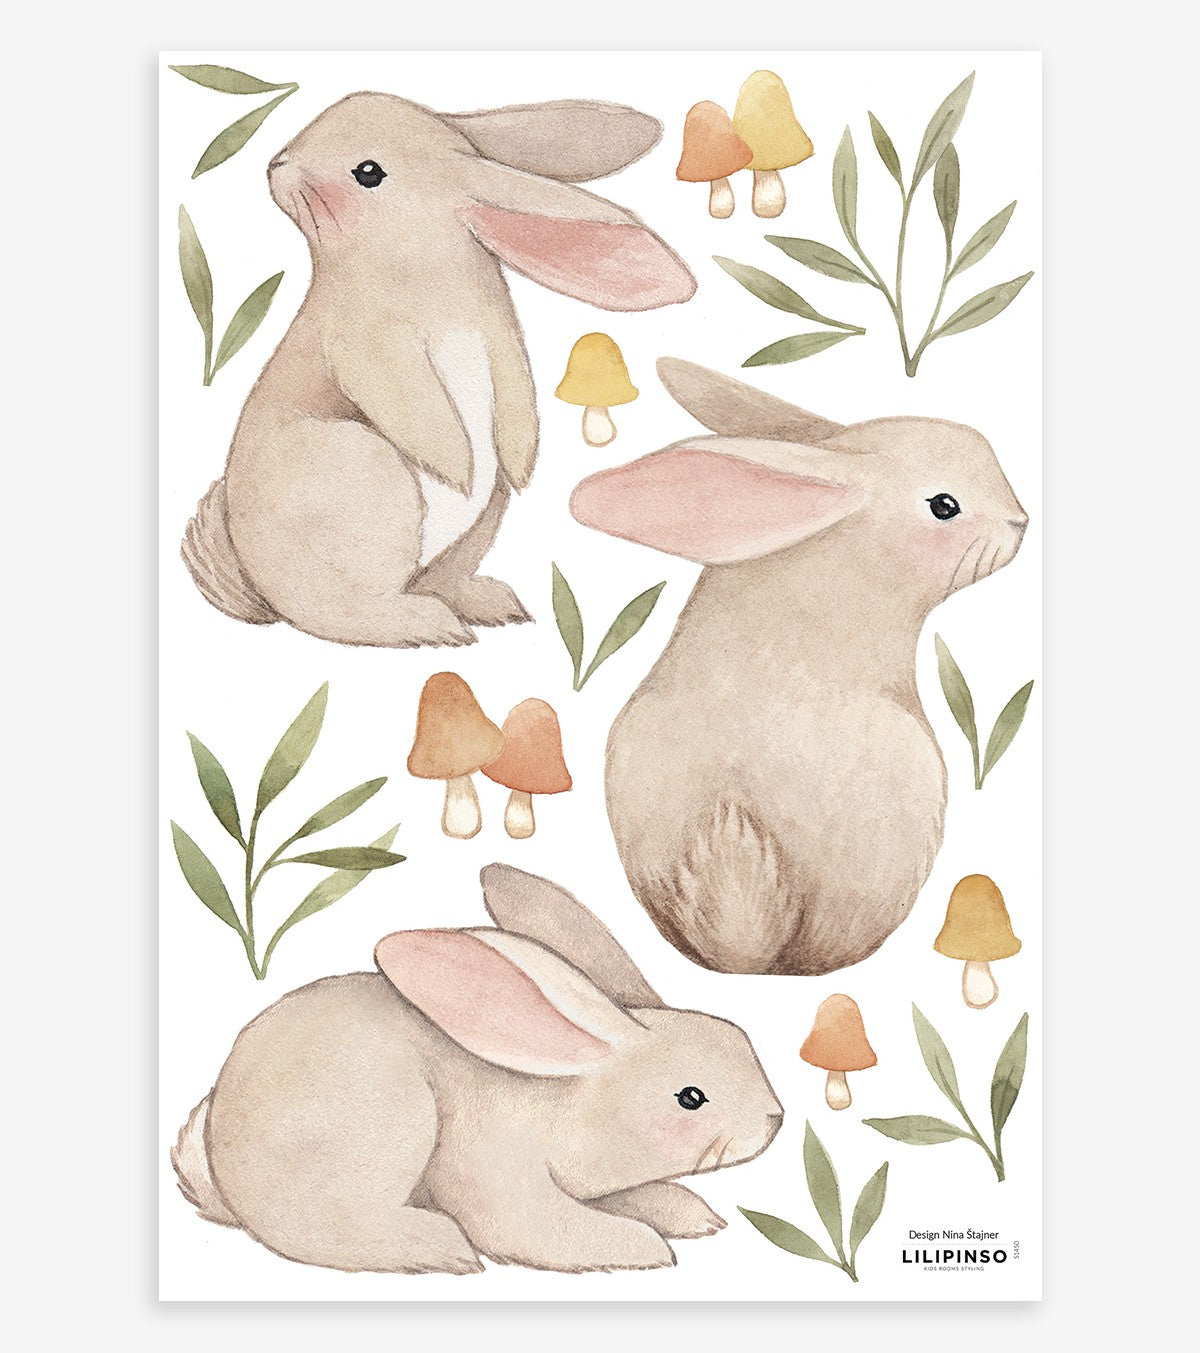 FOREST - Stickers muraux - Les lapins